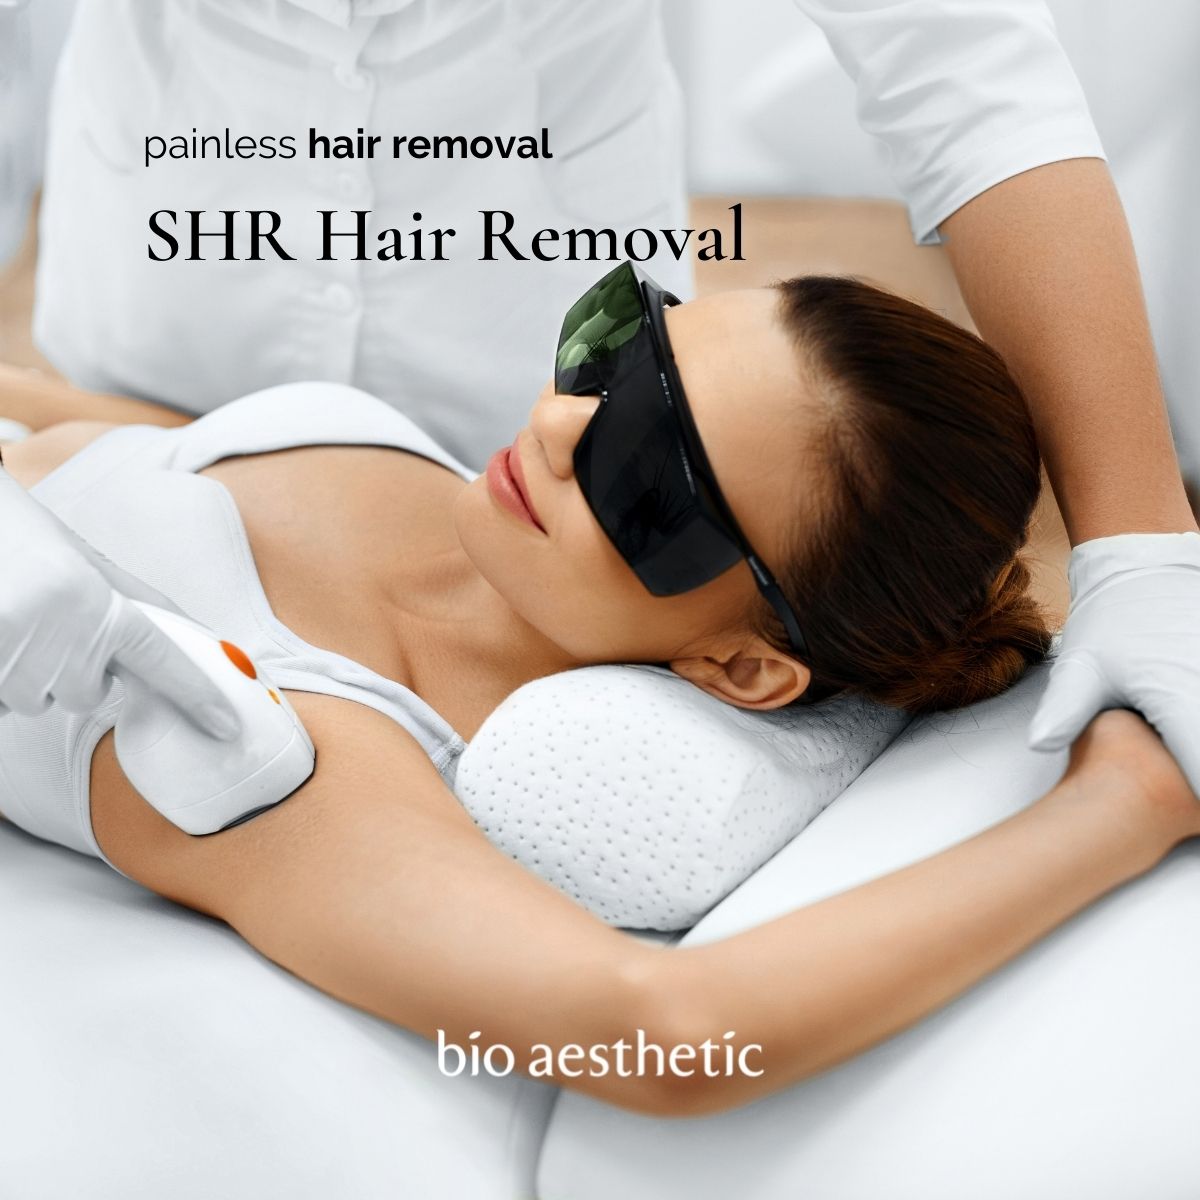 Discover the Top-Rated Bio Aesthetic SHR Hair Removal - Fast, Painless and Effective, Plus Try it for as Low as $39 in 2021!